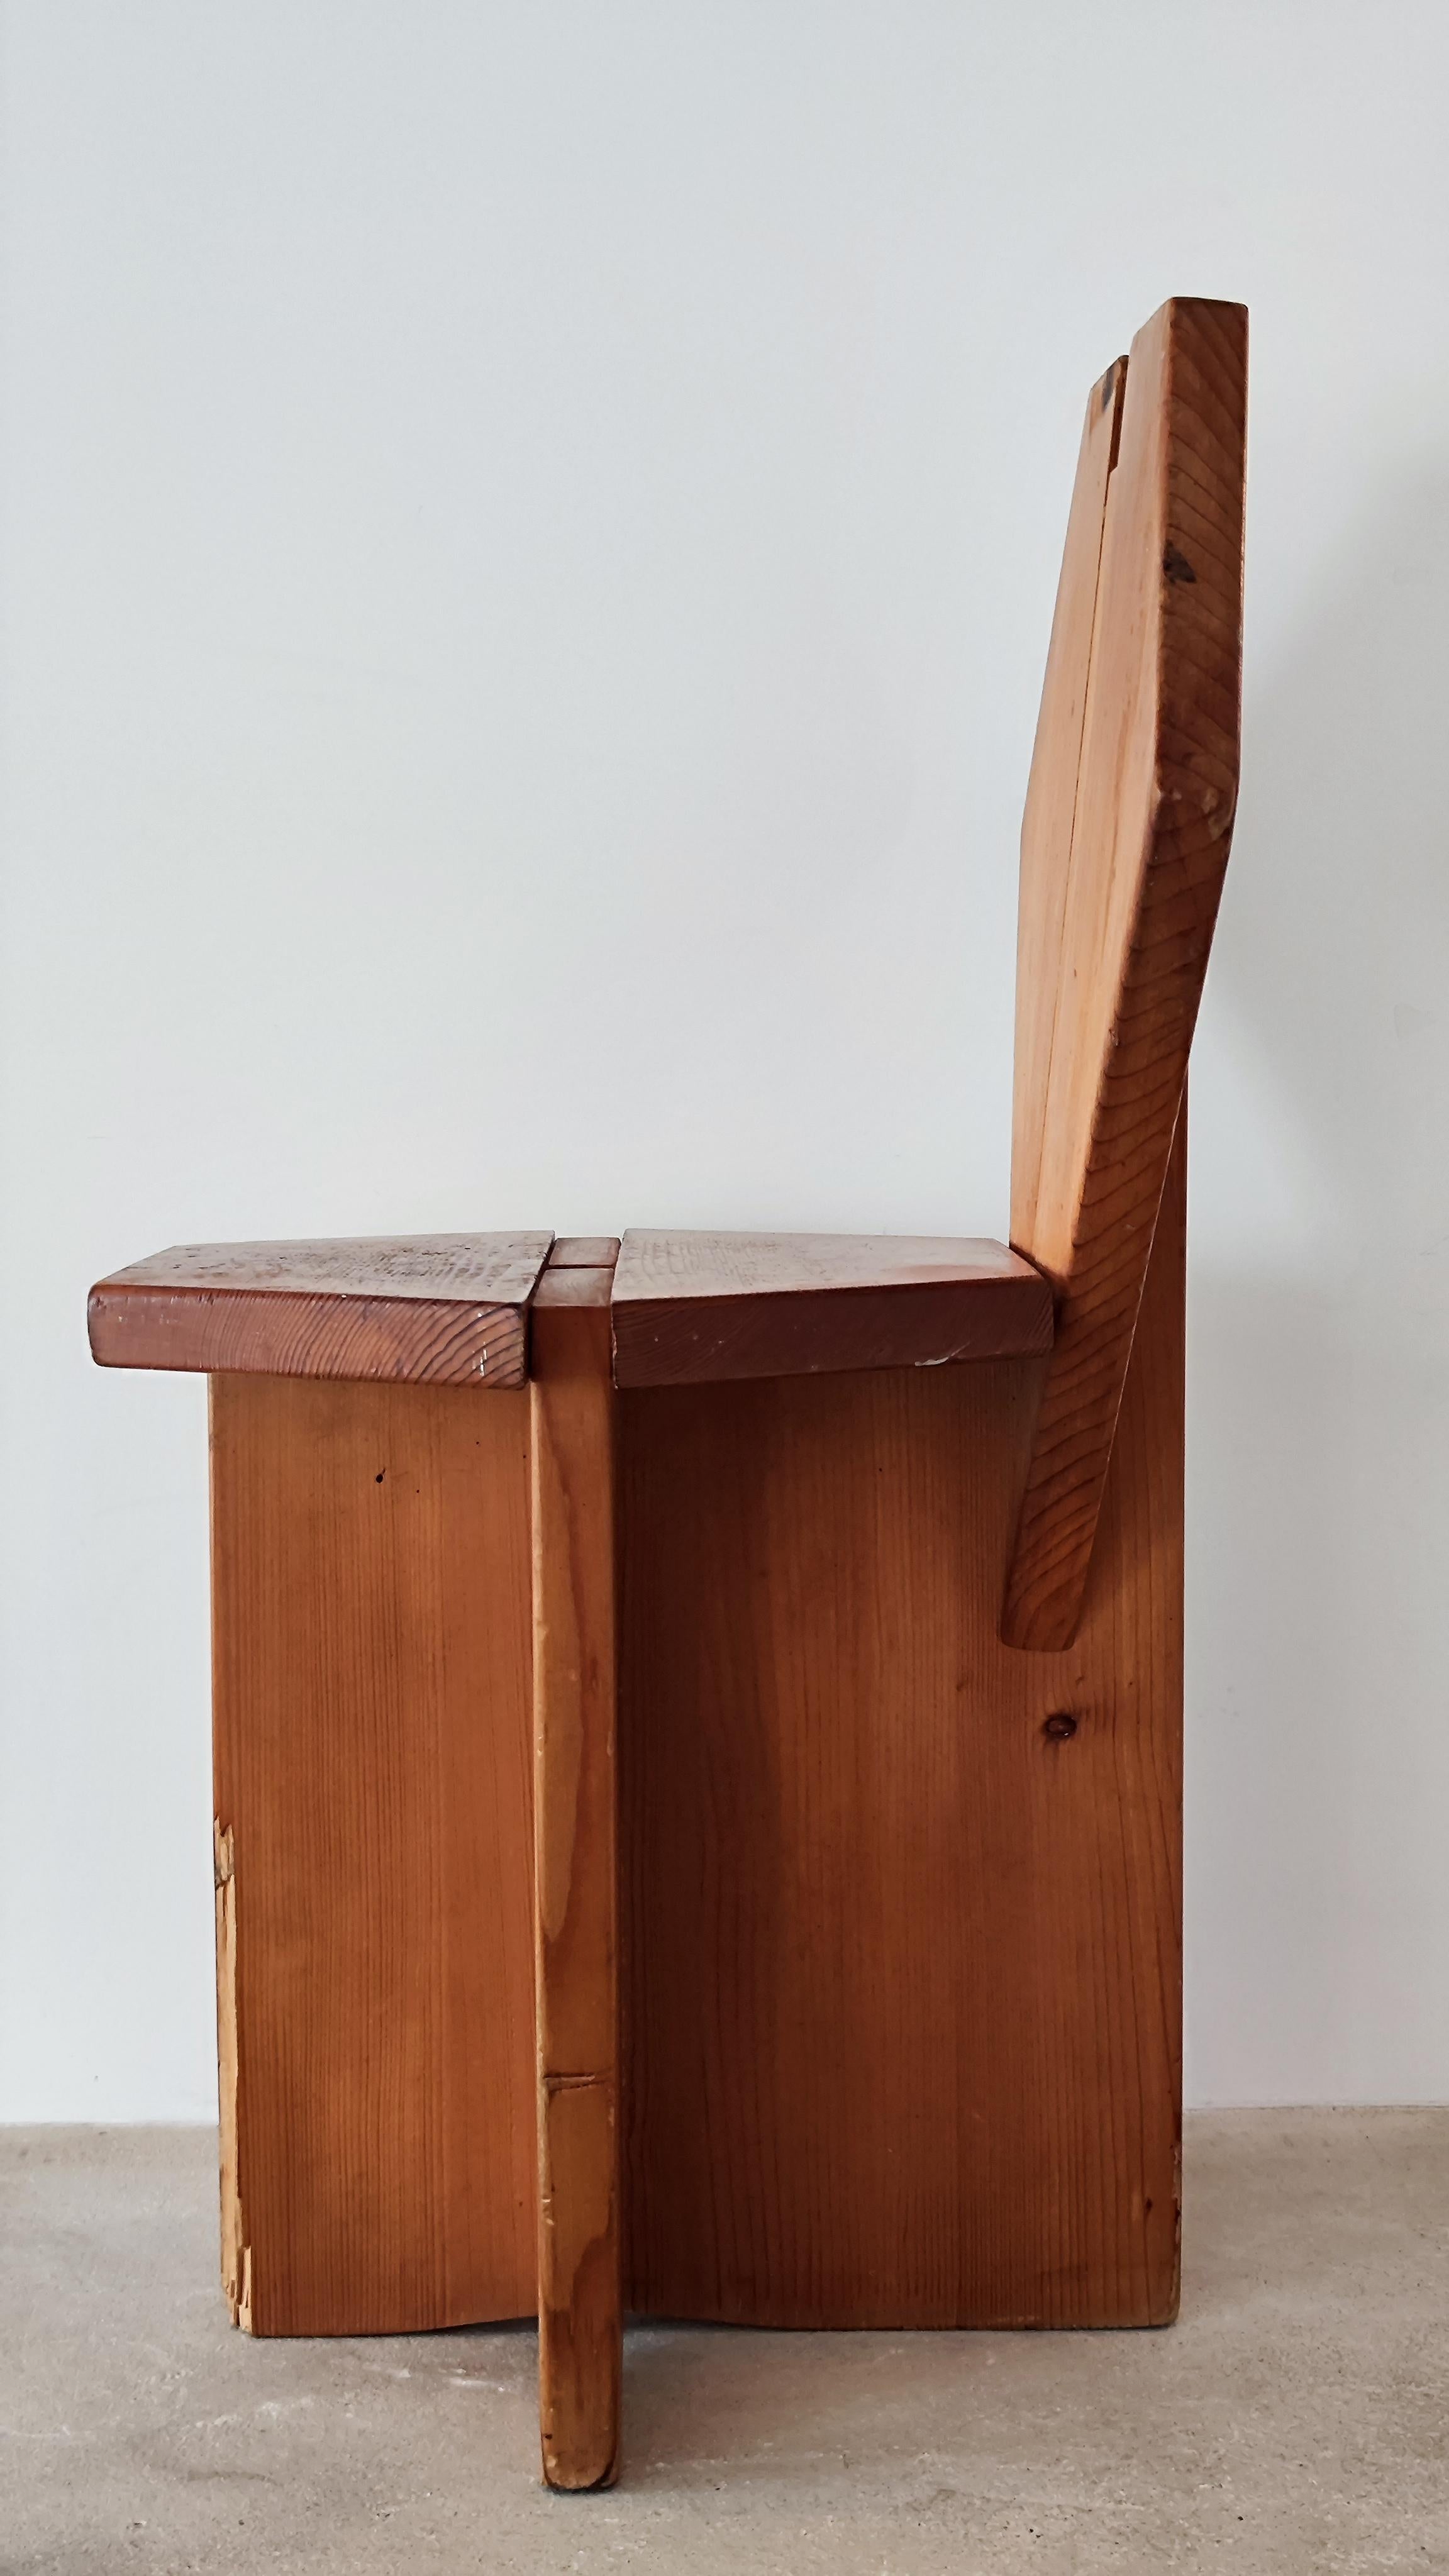 60s brutalist pine chair, France, Méribel - René Martin for Charlotte Perriand 6